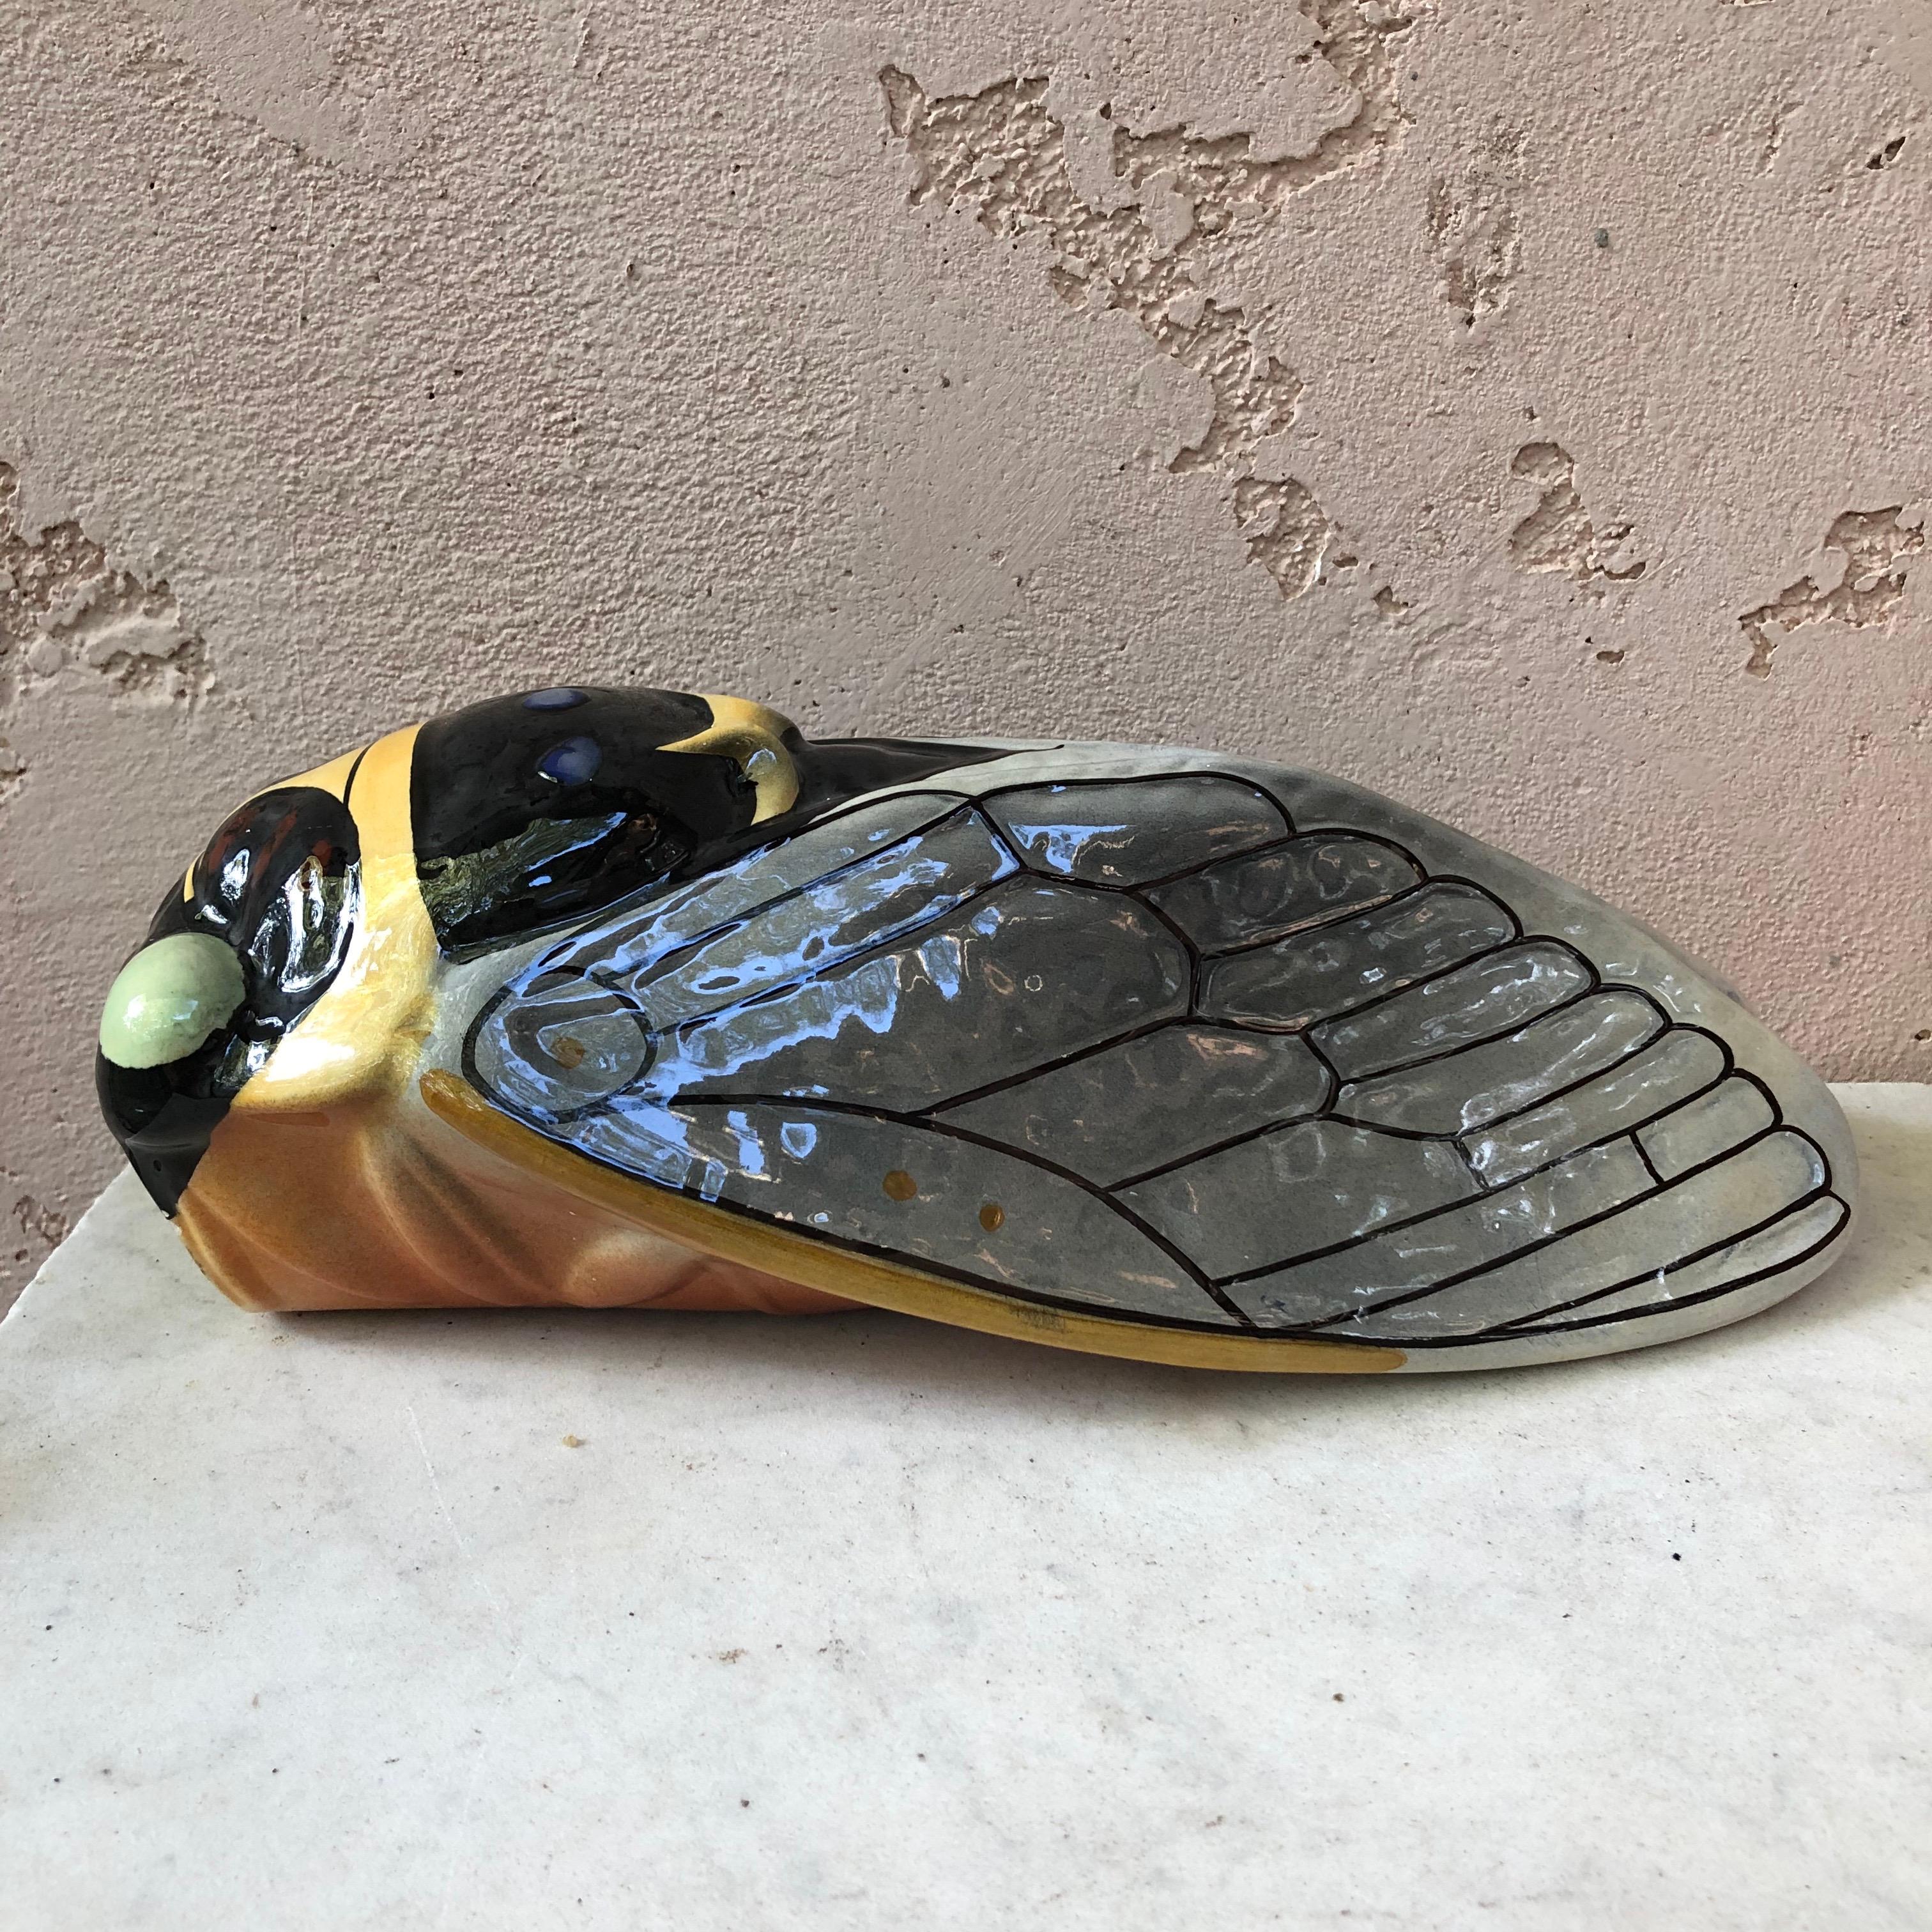 Large French Majolica cicada wall pocket signed Sicard from Provence.
Measures: Height / 11.3 inches.